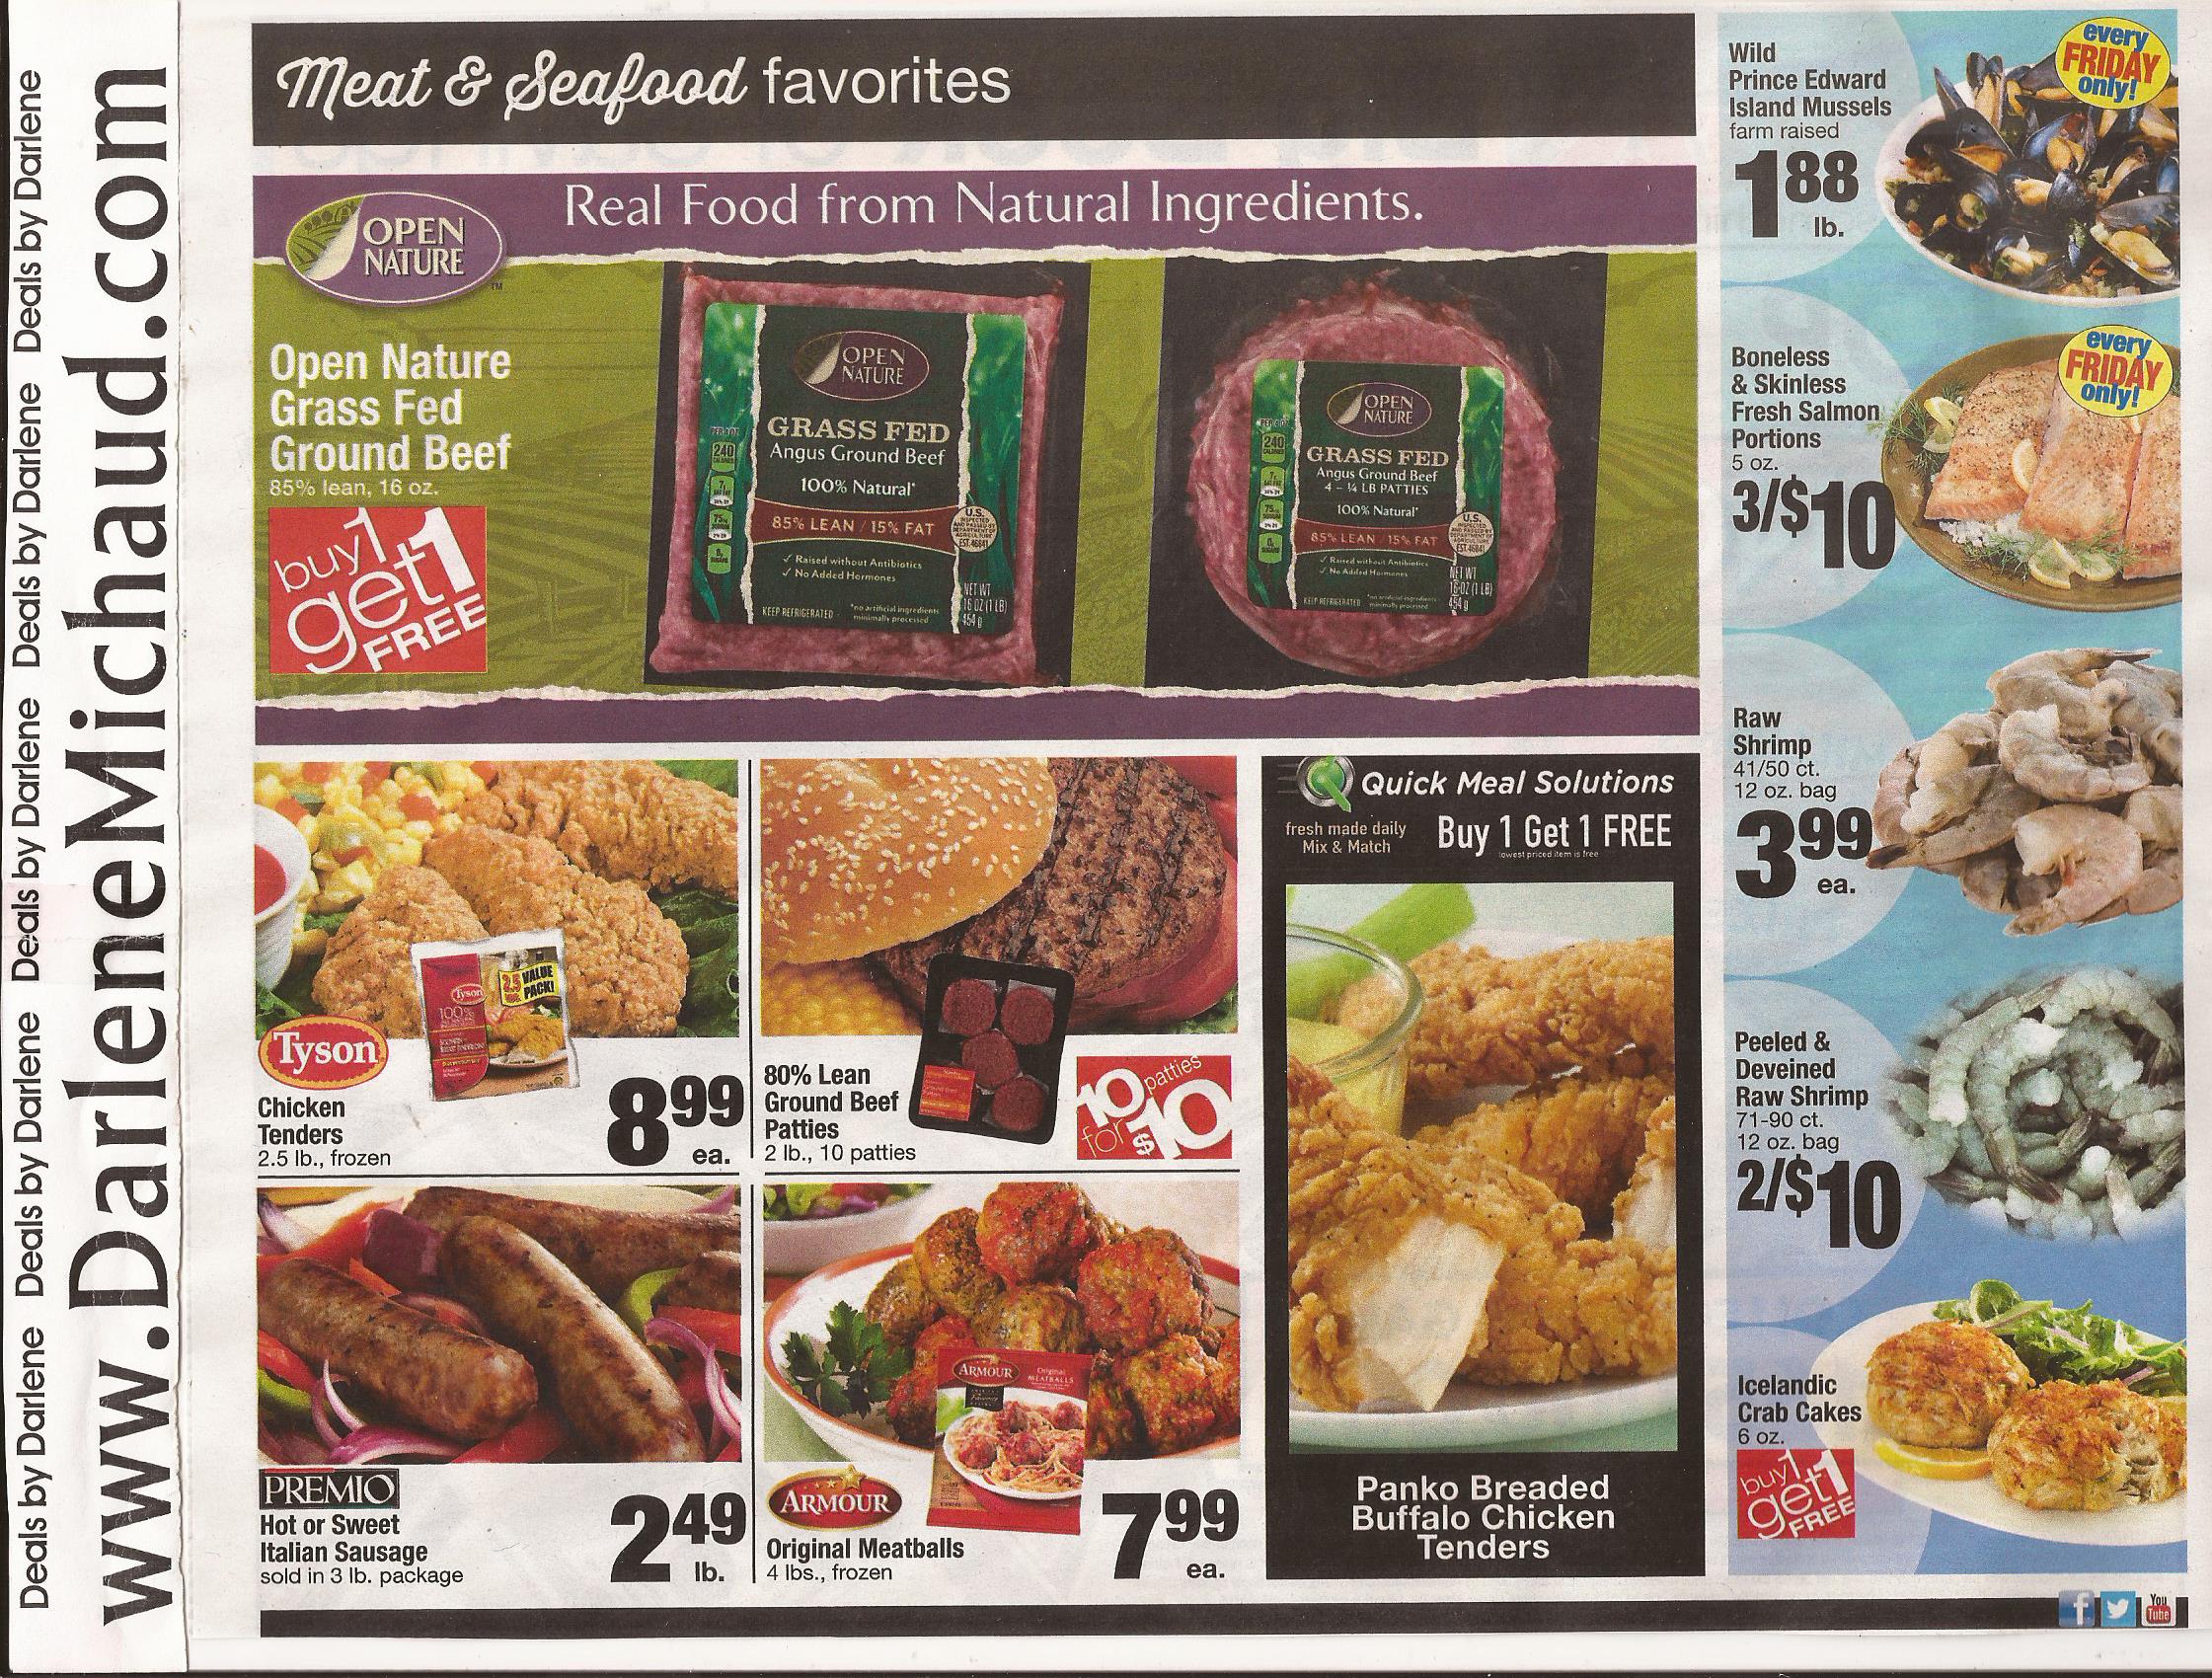 shaws-big-book-savings-march-4-march-31-page-02